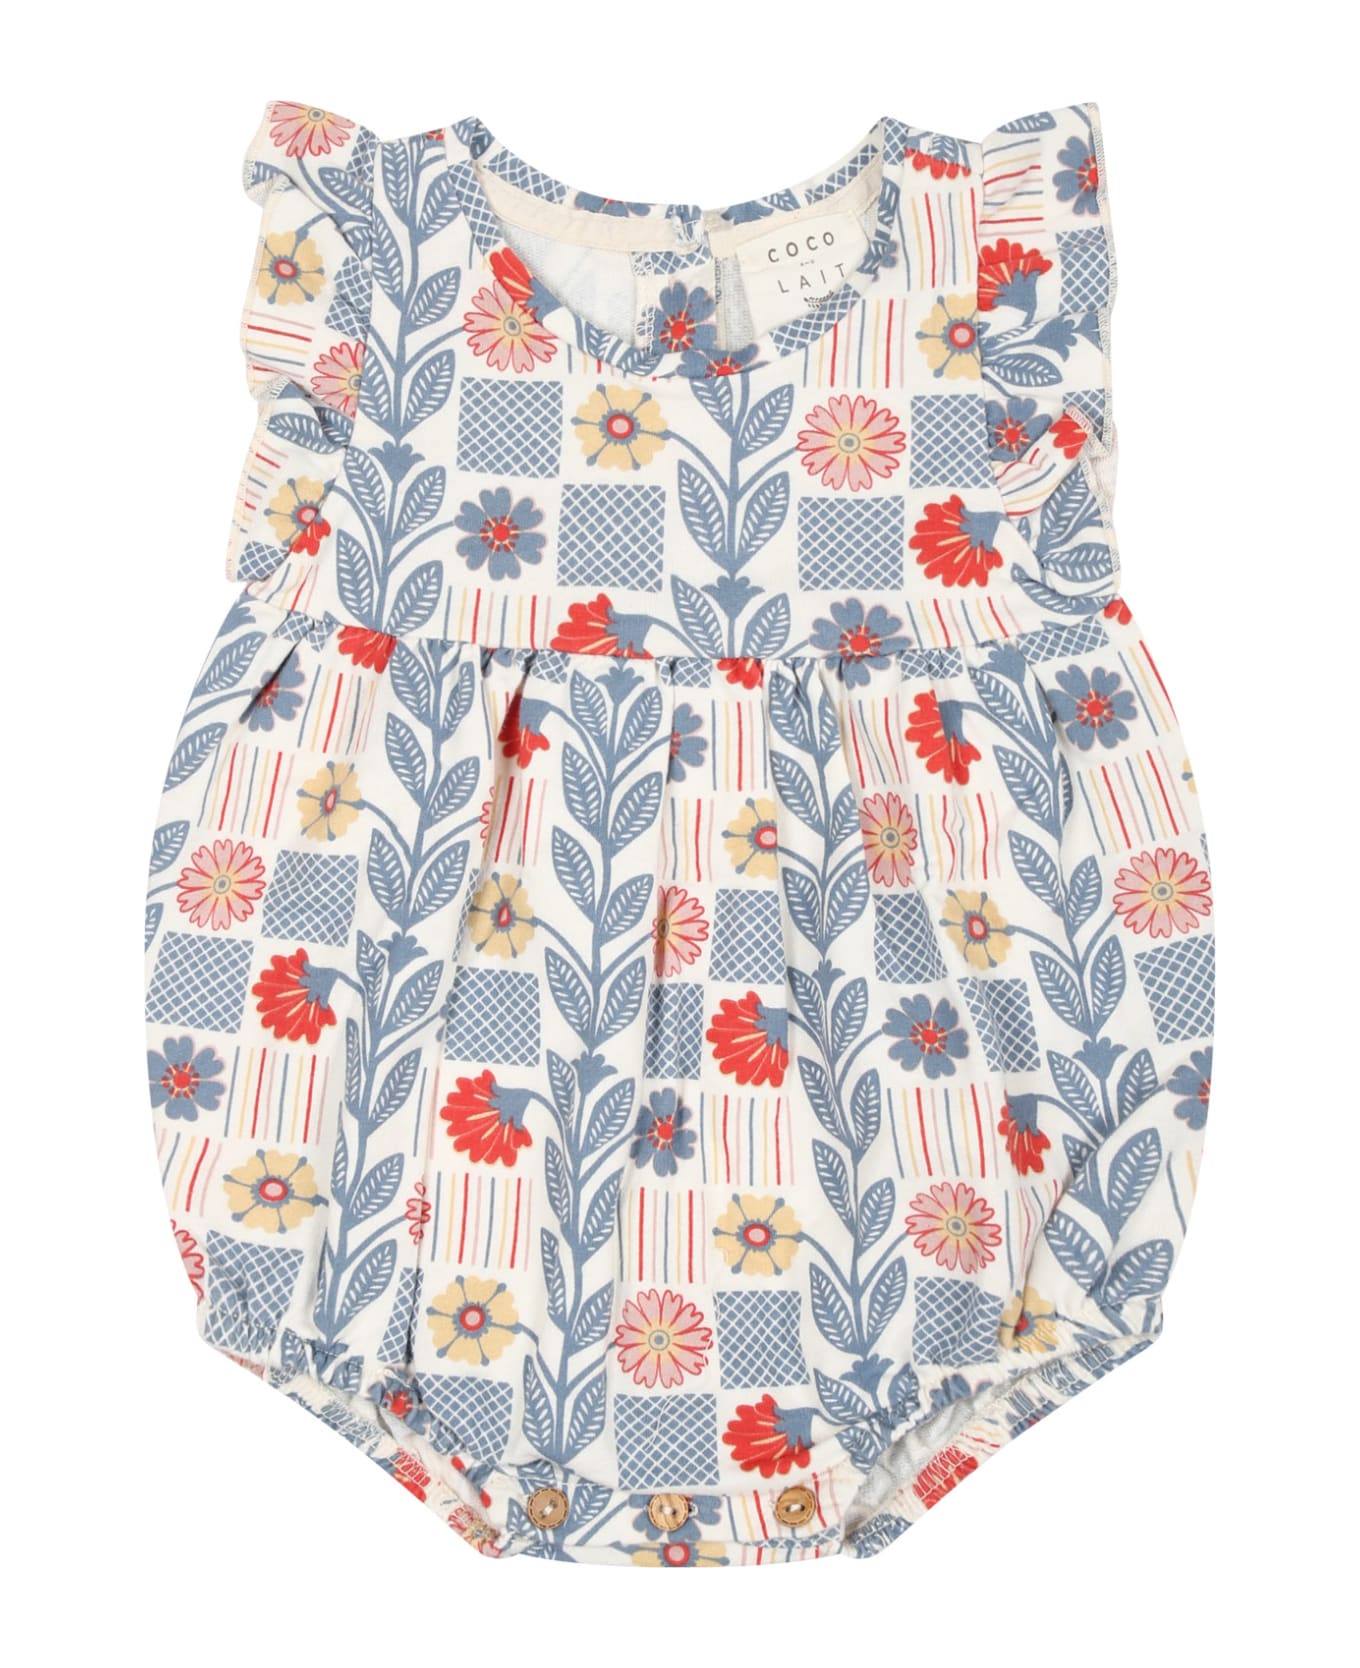 Coco Au Lait White Romper For Baby Girl With Flowers Print - Multicolor